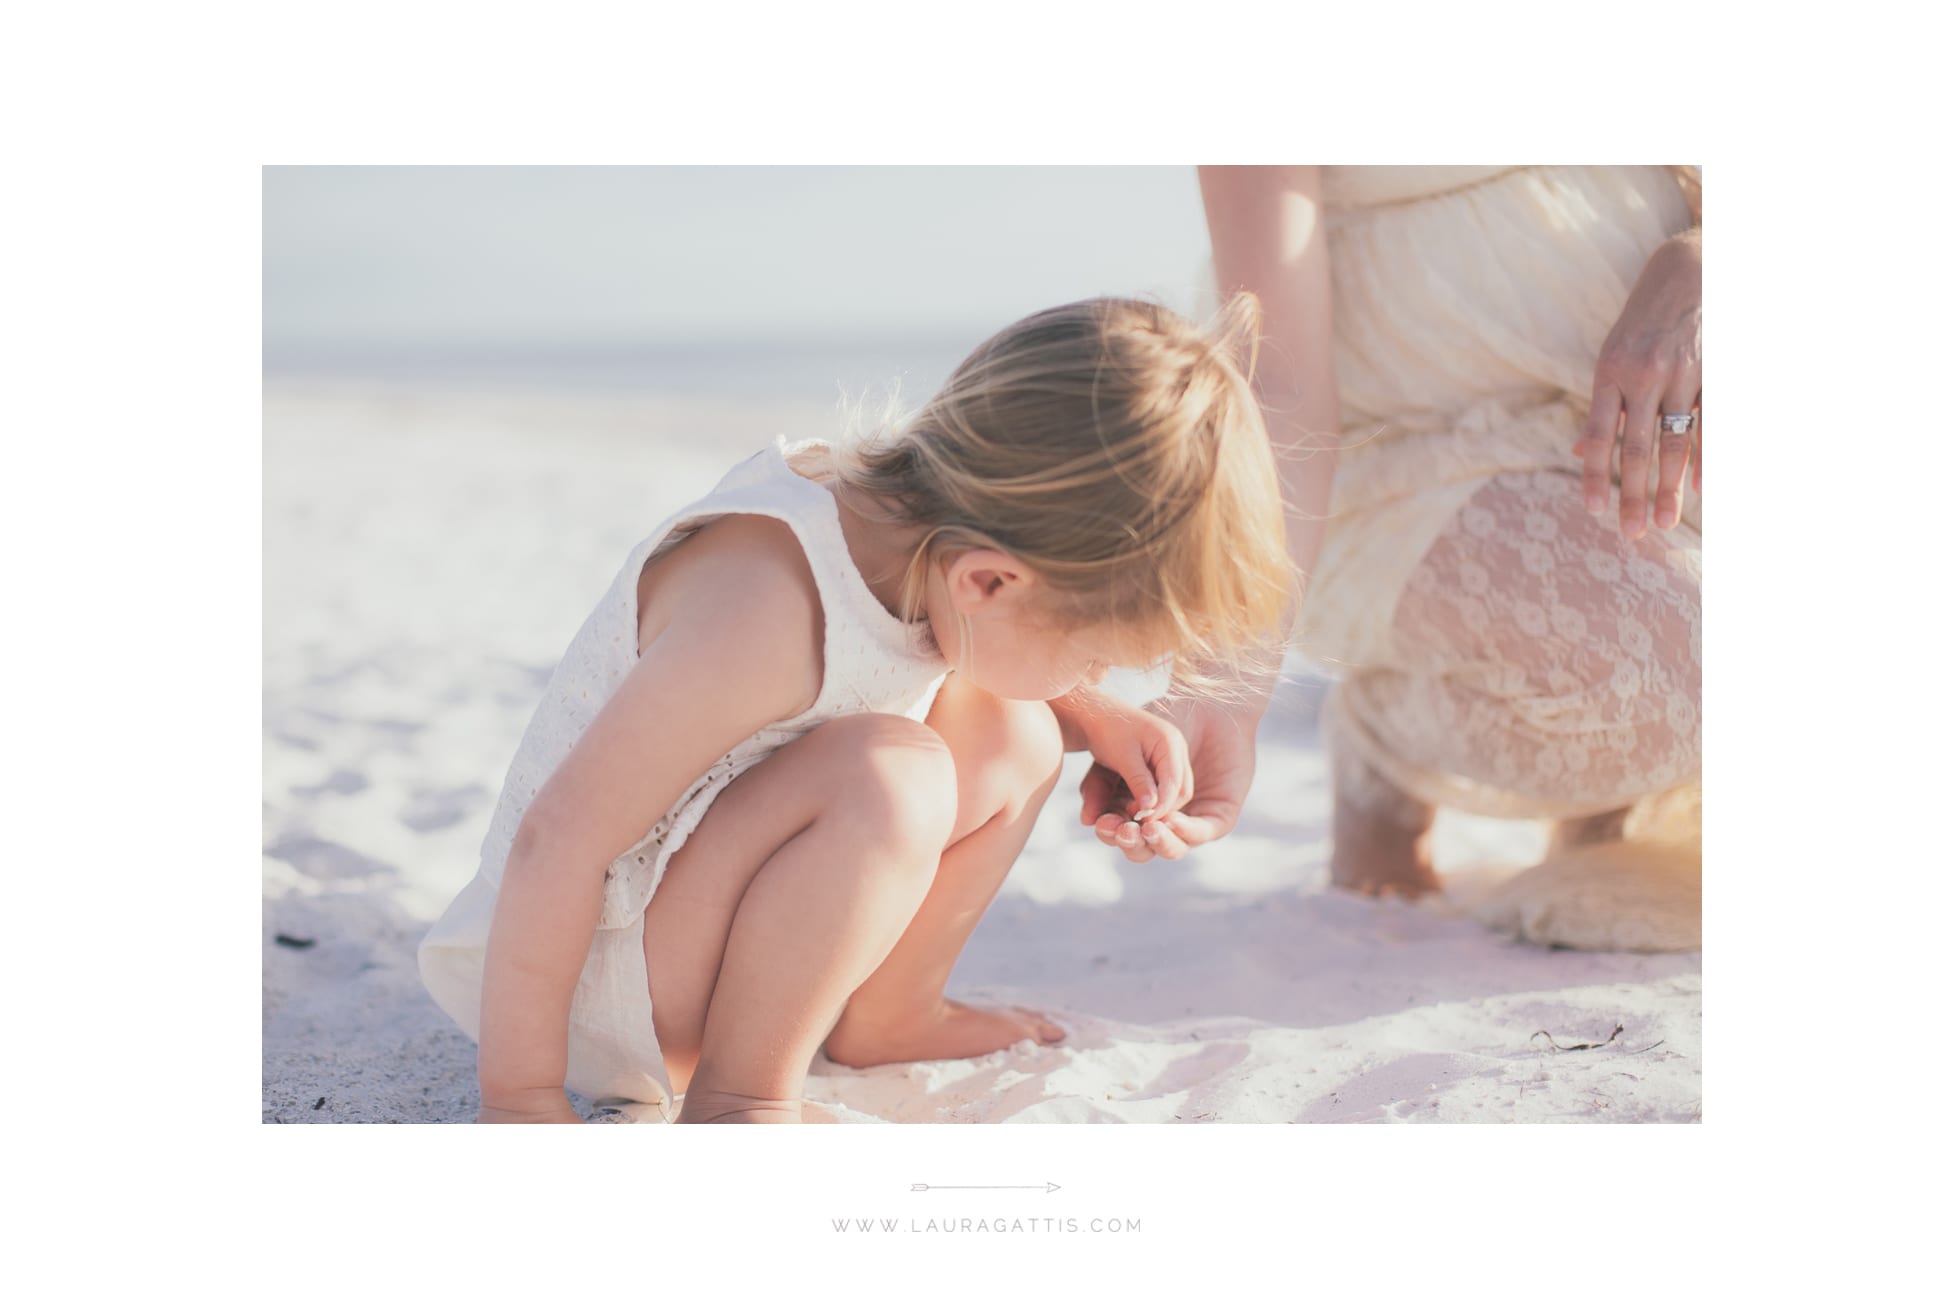 natural light maternity and mother & child beach session | laura gattis photography